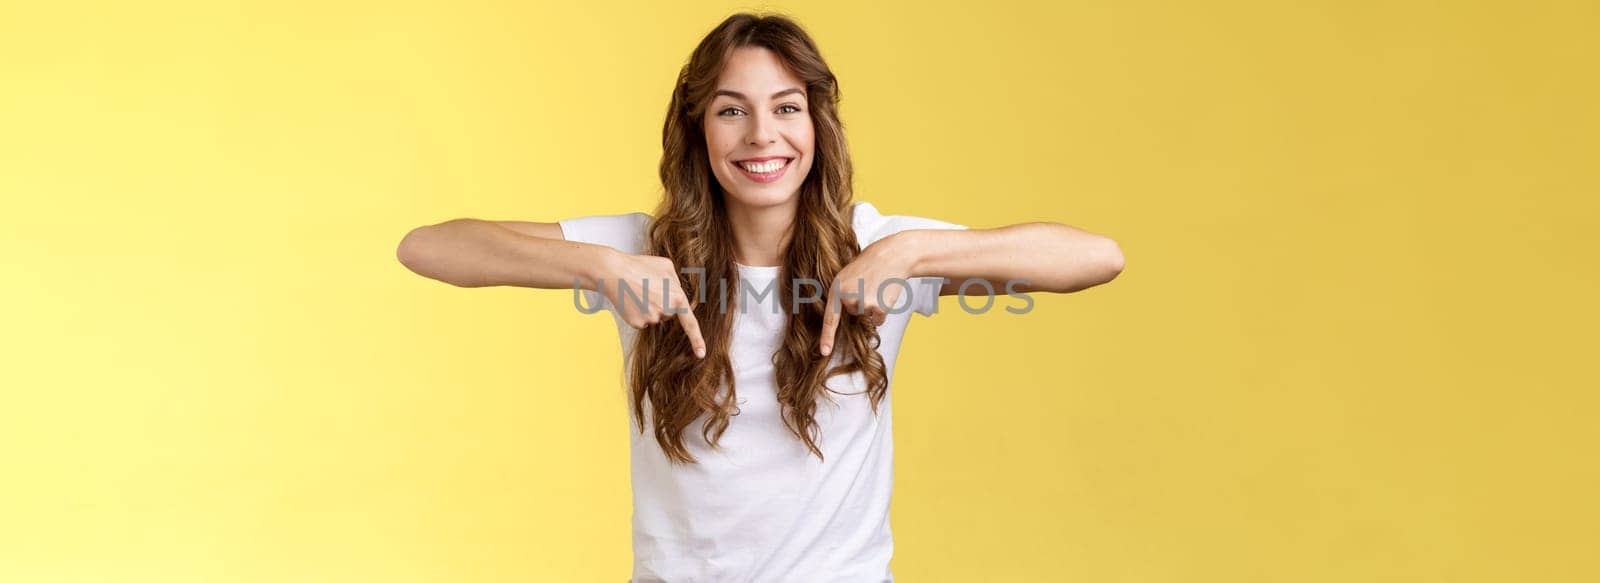 Friendly cheerful excited happy smiling girl long natural brunette haircut grinning joyfully pointing down index fingers show friend great choice introduce promo advice click link yellow background. Lifestyle.